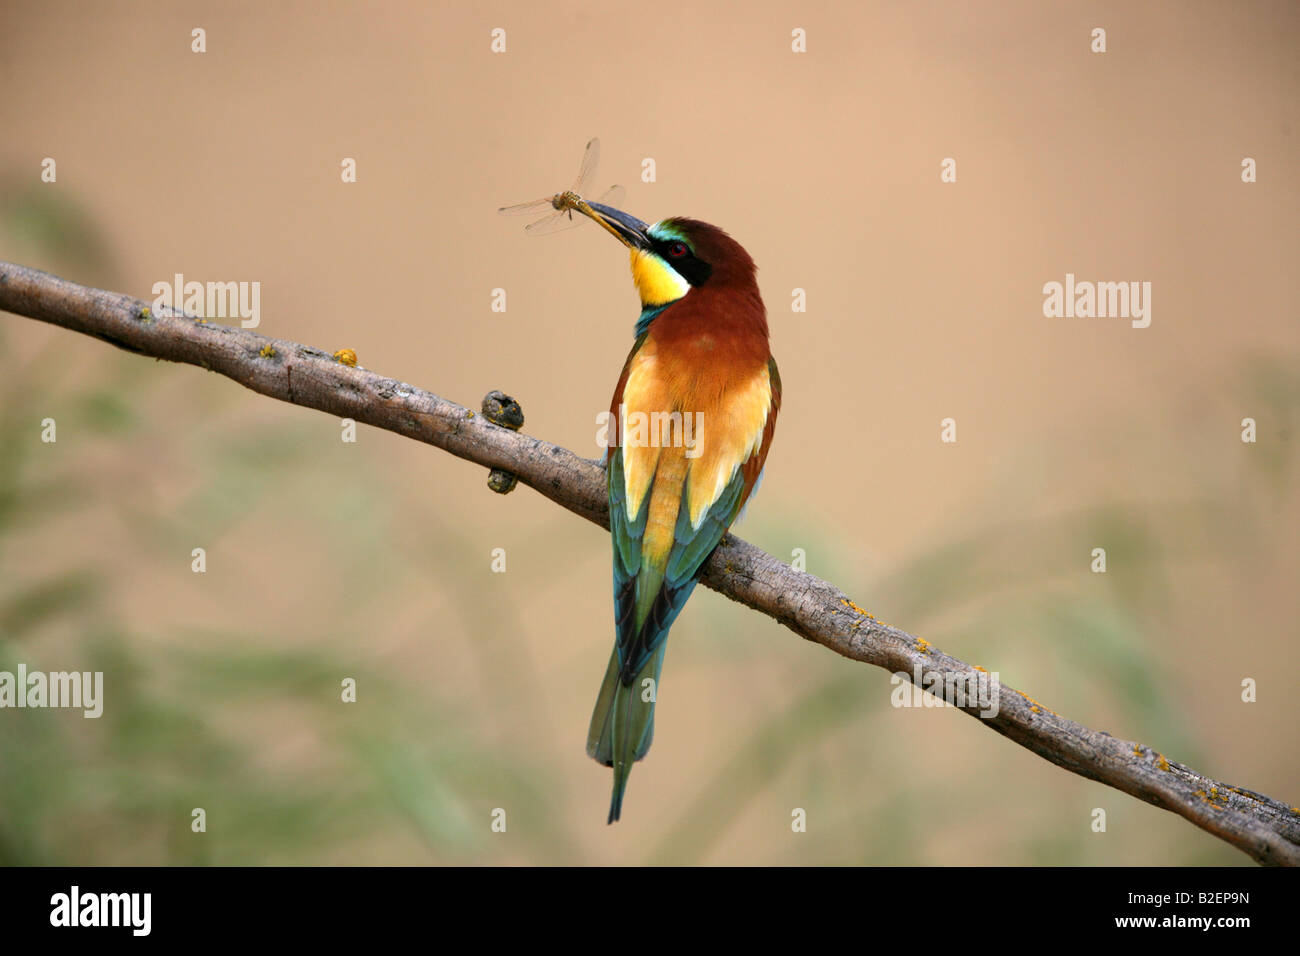 European Bee eater Merops apiaster by Spanish river Stock Photo